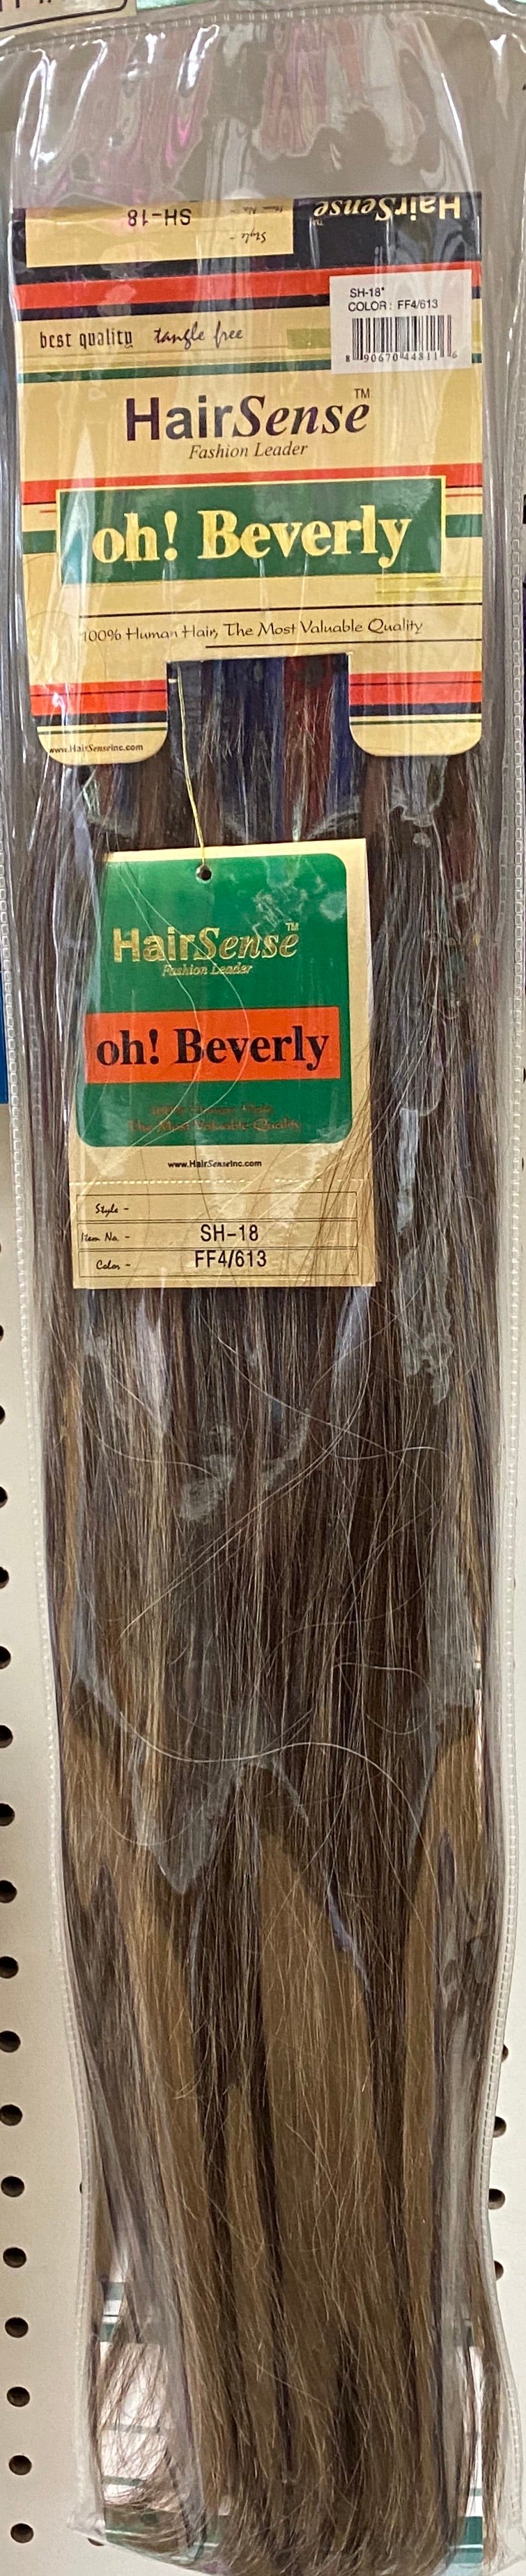 Oh! Beverly 100% Human Hair Weaving Hair Extensions